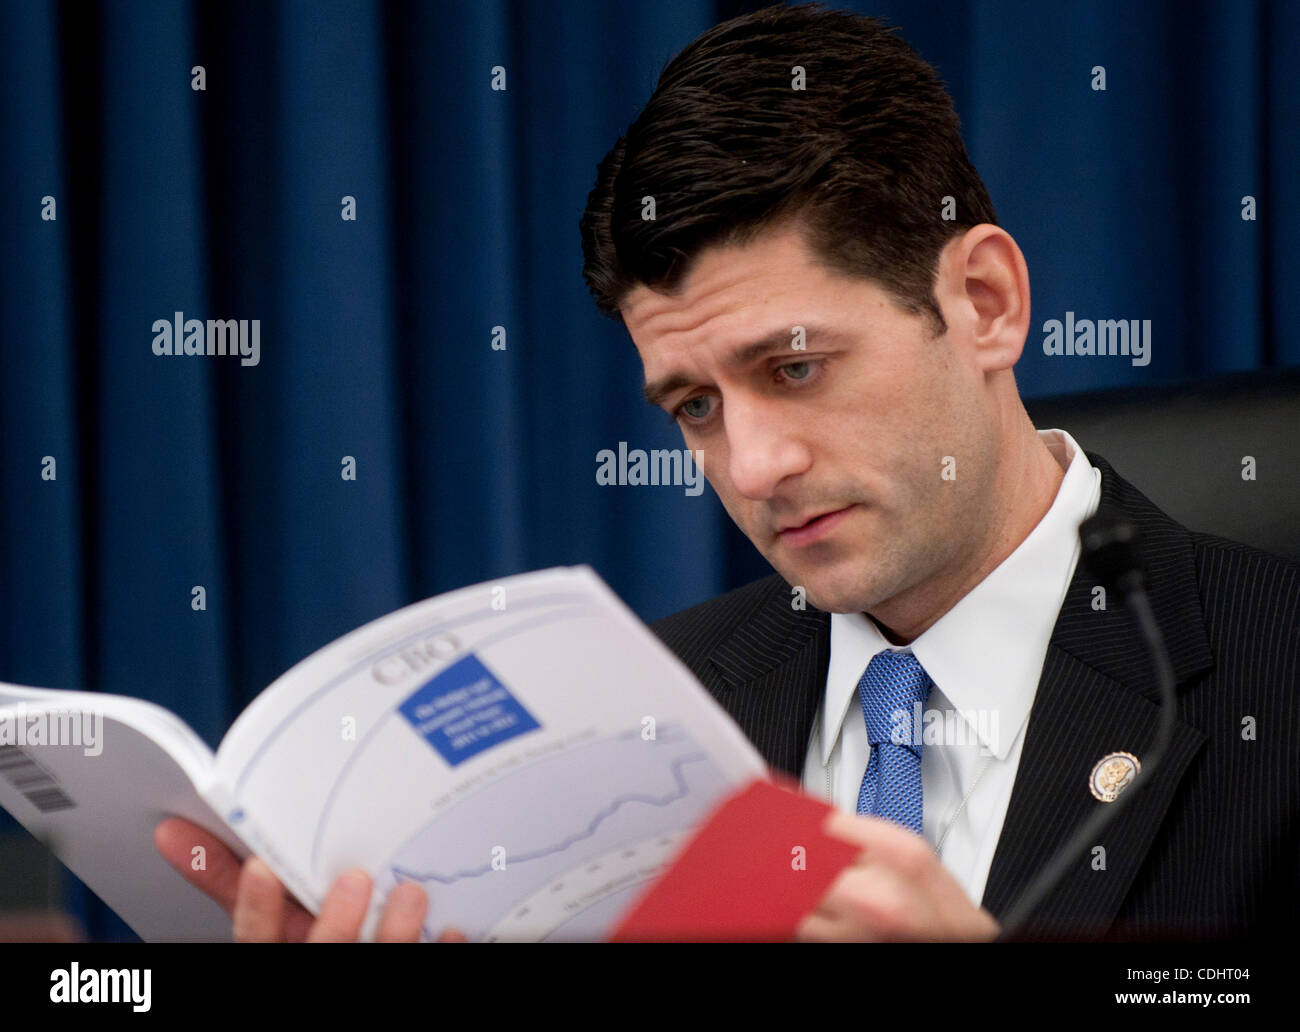 Feb 10, 2011 - Washington, District of Columbia, U.S. - House Budget Committee Chairman Rep. PAUL RYAN (R-WI) looks over the Congressional Budget Office's Budget and Economic Outlook Report before hearing testimony from CBO Director Elmendorf on Thursday. (Credit Image: © Pete Marovich/ZUMAPRESS.com Stock Photo